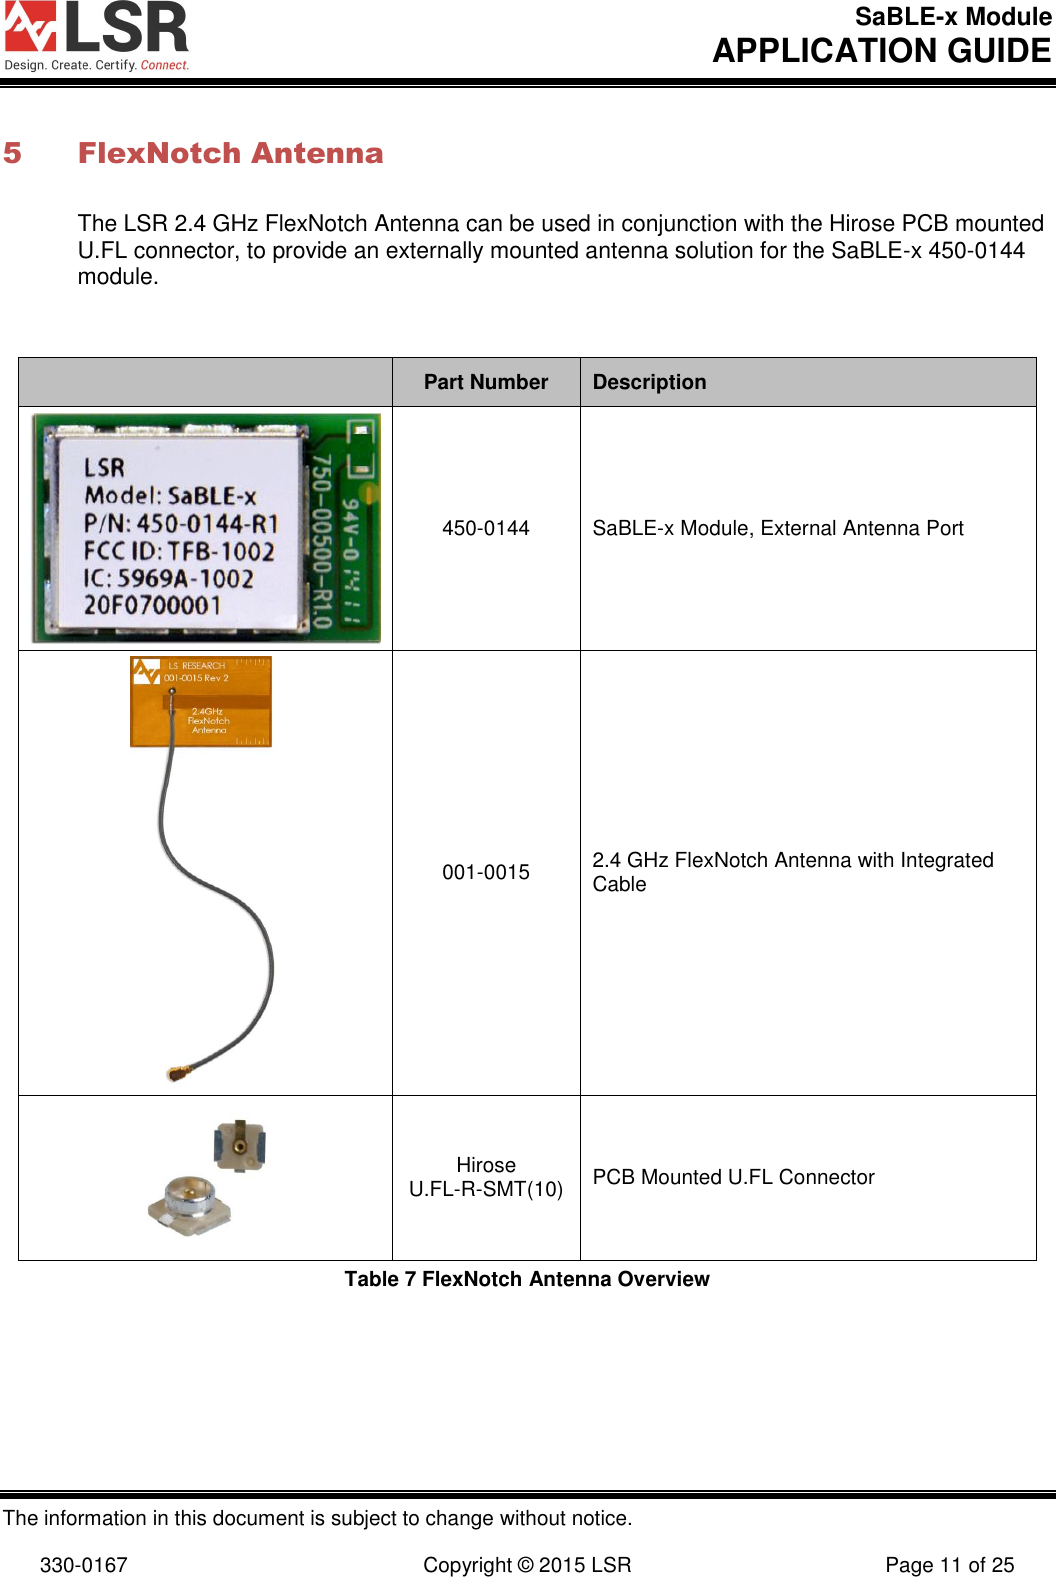 SaBLE-x Module       APPLICATION GUIDE  The information in this document is subject to change without notice.  330-0167  Copyright © 2015 LSR  Page 11 of 25 5 FlexNotch Antenna The LSR 2.4 GHz FlexNotch Antenna can be used in conjunction with the Hirose PCB mounted U.FL connector, to provide an externally mounted antenna solution for the SaBLE-x 450-0144 module.   Part Number Description  450-0144 SaBLE-x Module, External Antenna Port  001-0015 2.4 GHz FlexNotch Antenna with Integrated Cable  Hirose  U.FL-R-SMT(10) PCB Mounted U.FL Connector Table 7 FlexNotch Antenna Overview    